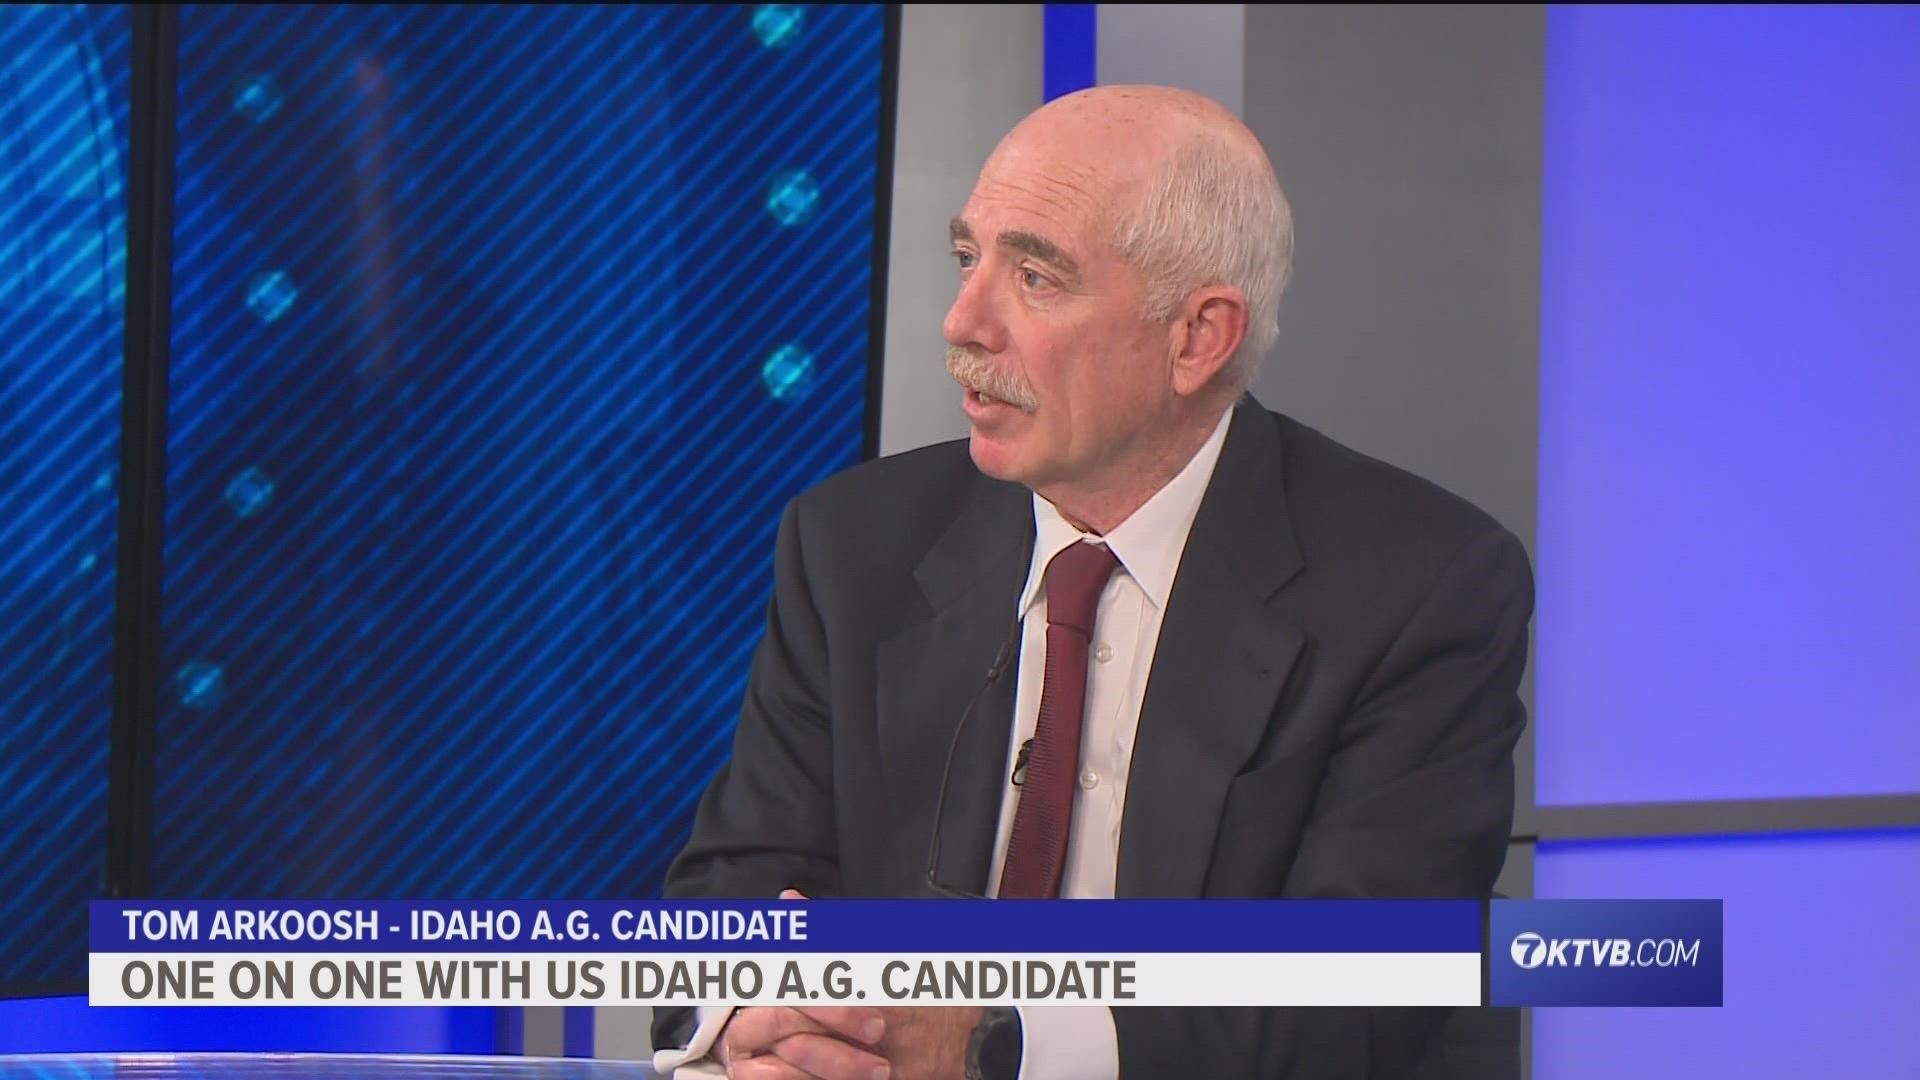 Ahead of the November election, Democrat candidate Tom Arkoosh discusses his campaign priorities and thoughts on major Idaho political topics.